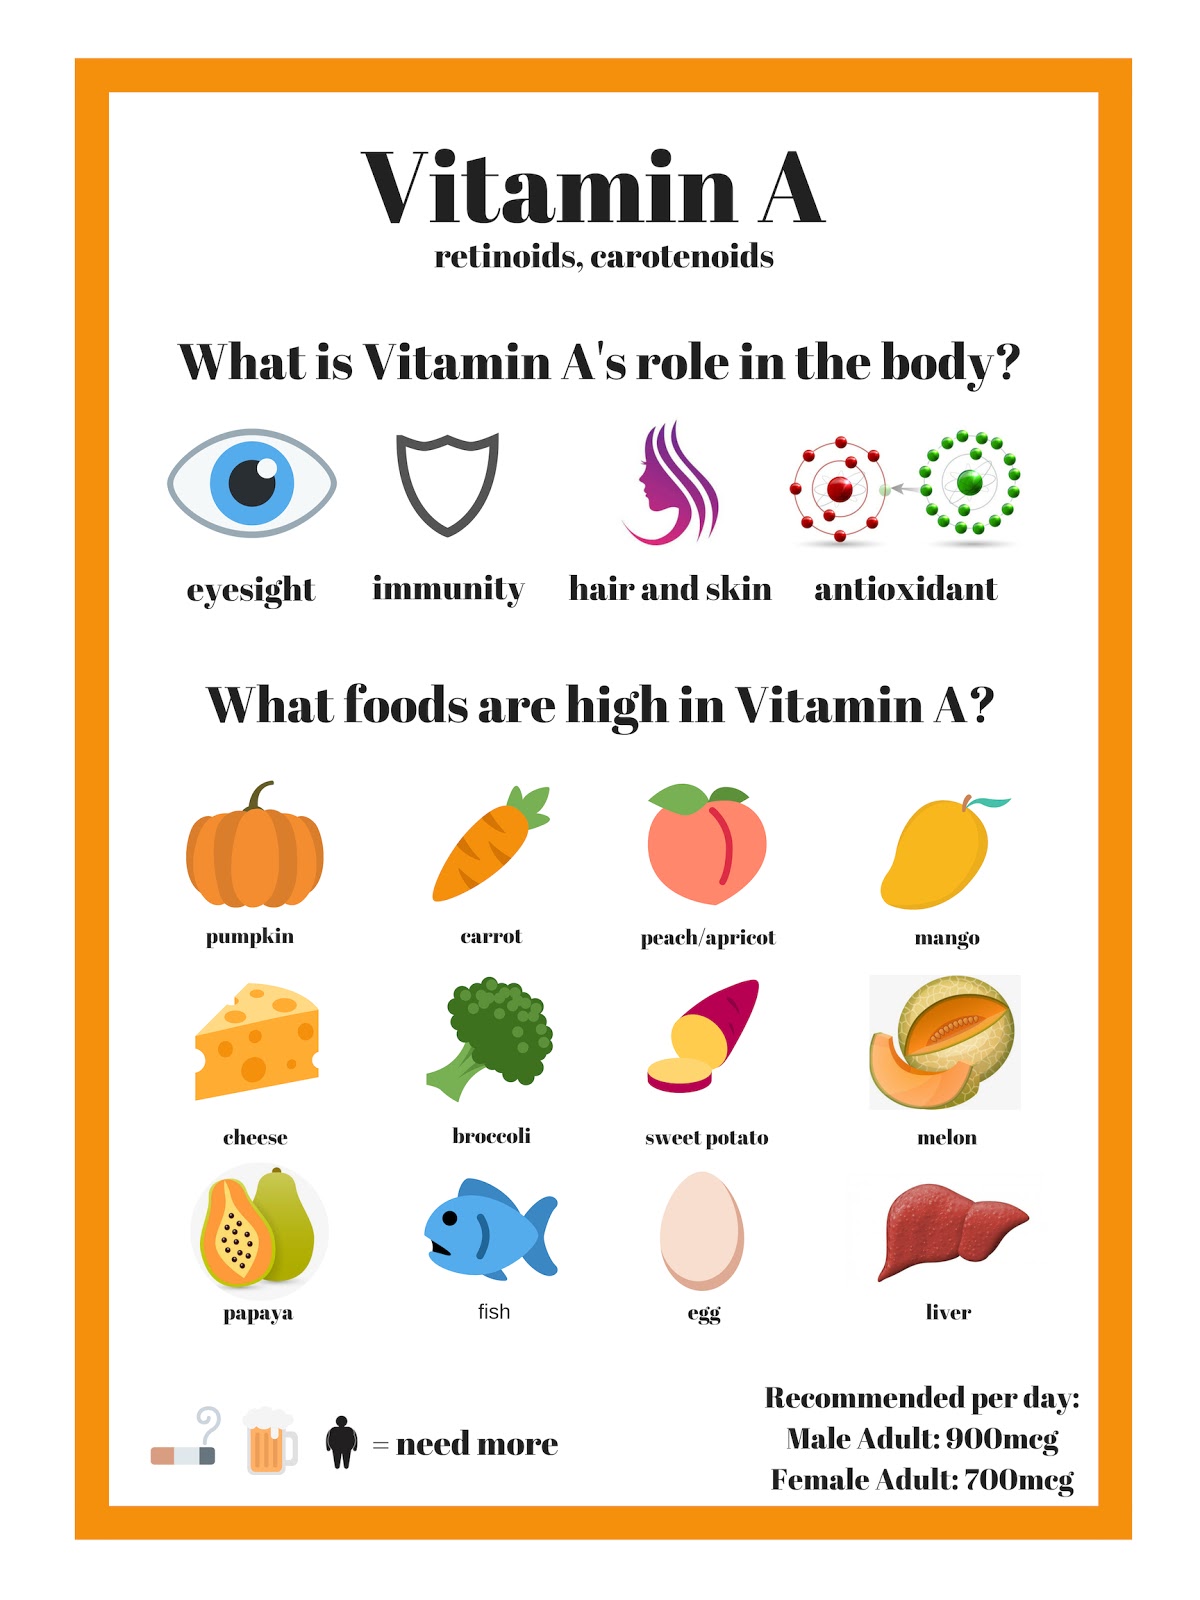 Role of Vitamin A in the body